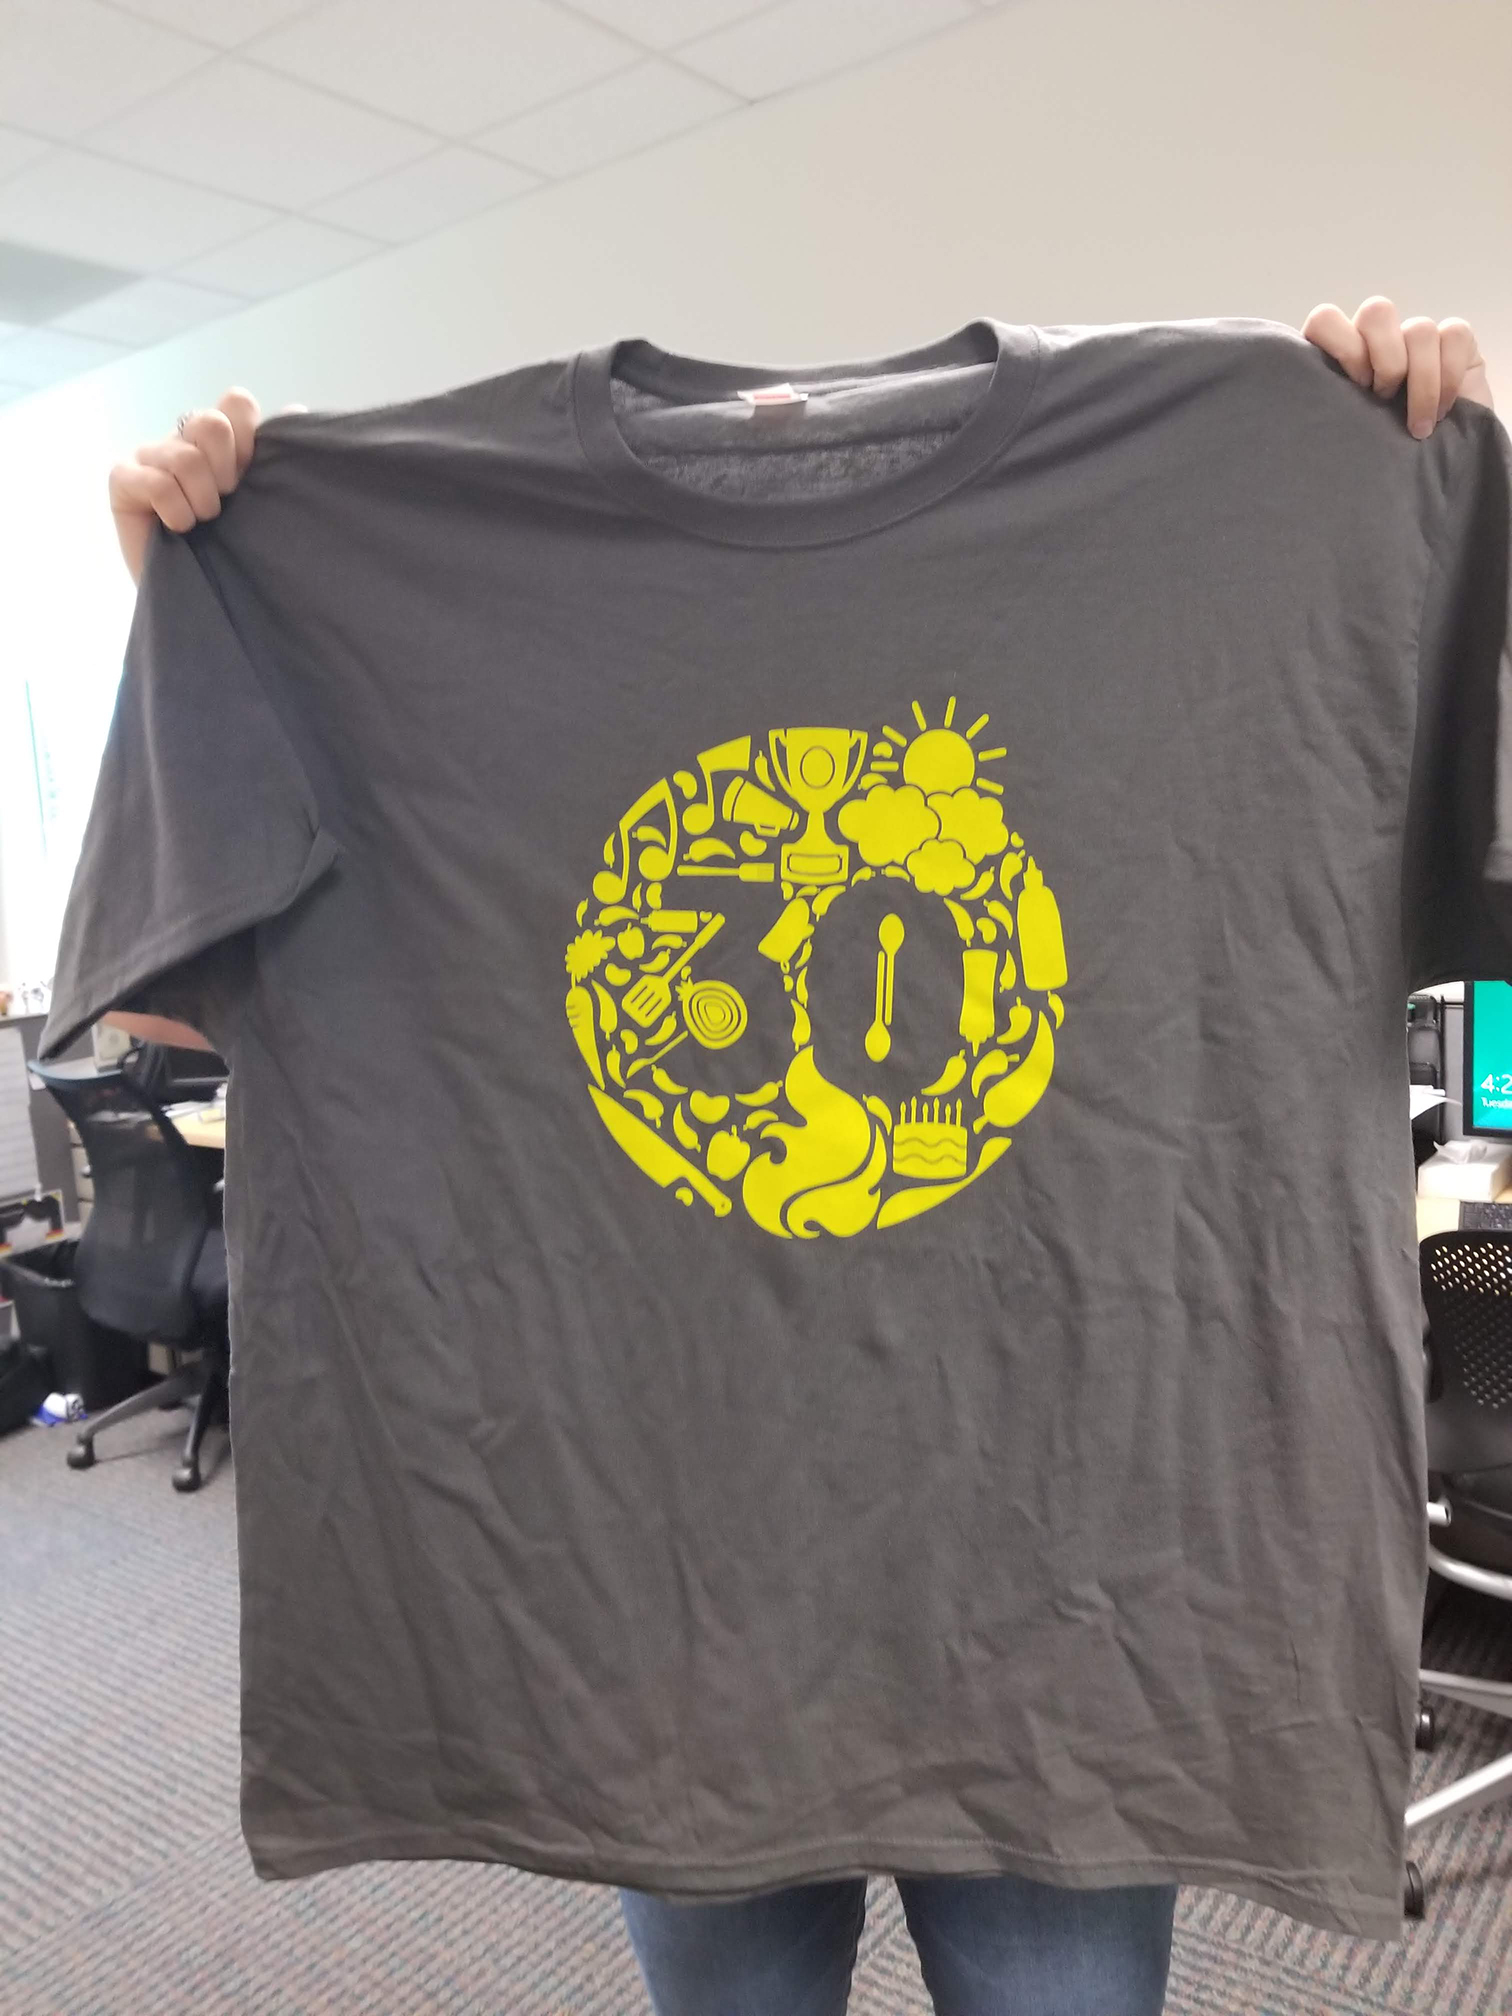 PHOTO: gray t-shirt featuring the number 30 in a yellow circle featuring various cook-off themed symbols. Photo by The Signal reporter Emily Wilkinson.